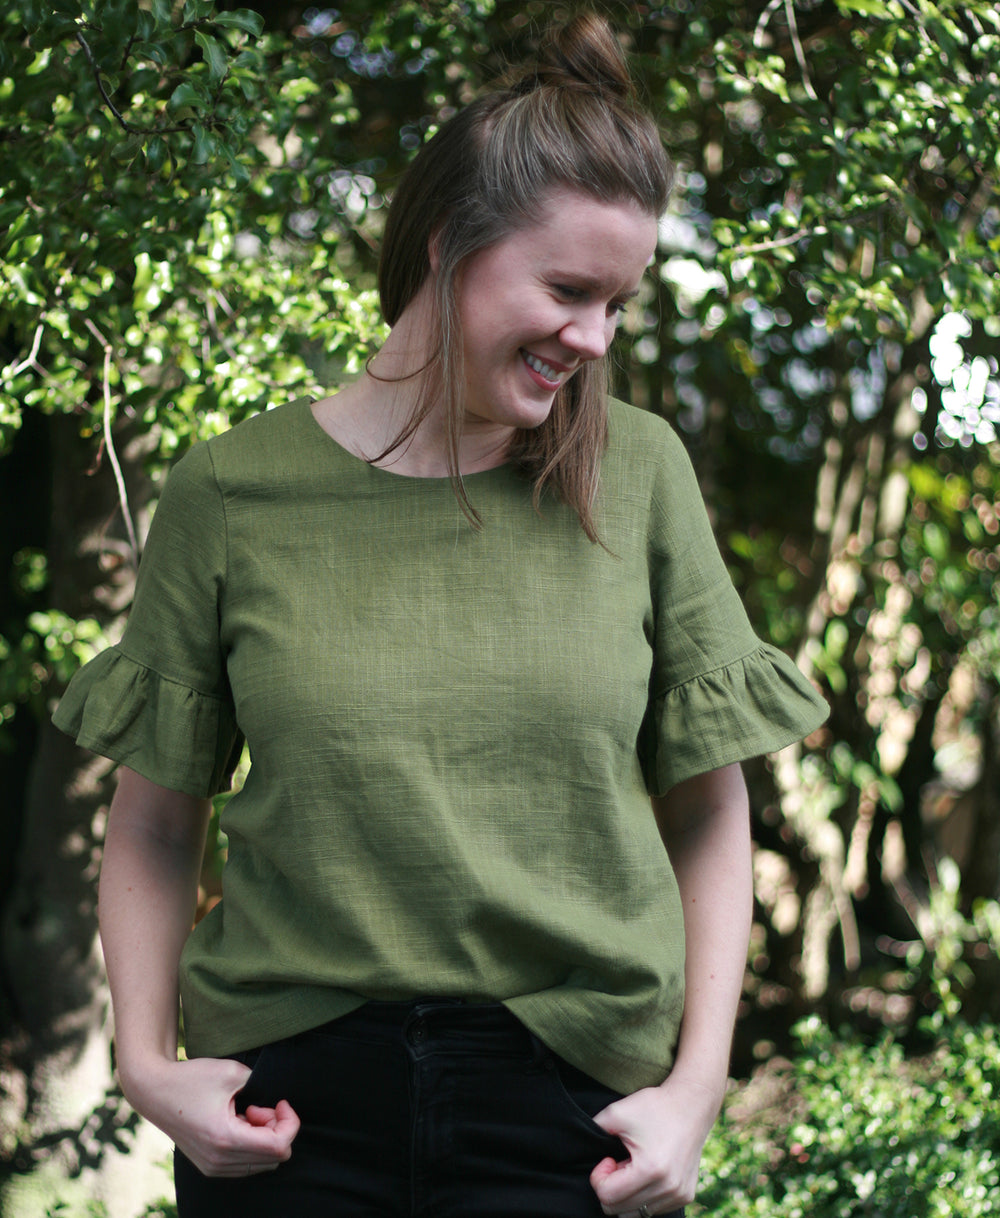 Woman wearing the Rātā Top sewing pattern by Below the Kowhai. A blouse pattern made in light to medium weight cotton, chambray, poly cotton, linen, rayon, sateen or tencel fabrics, featuring a round neckline, button and loop back closure and a sleeve ruf